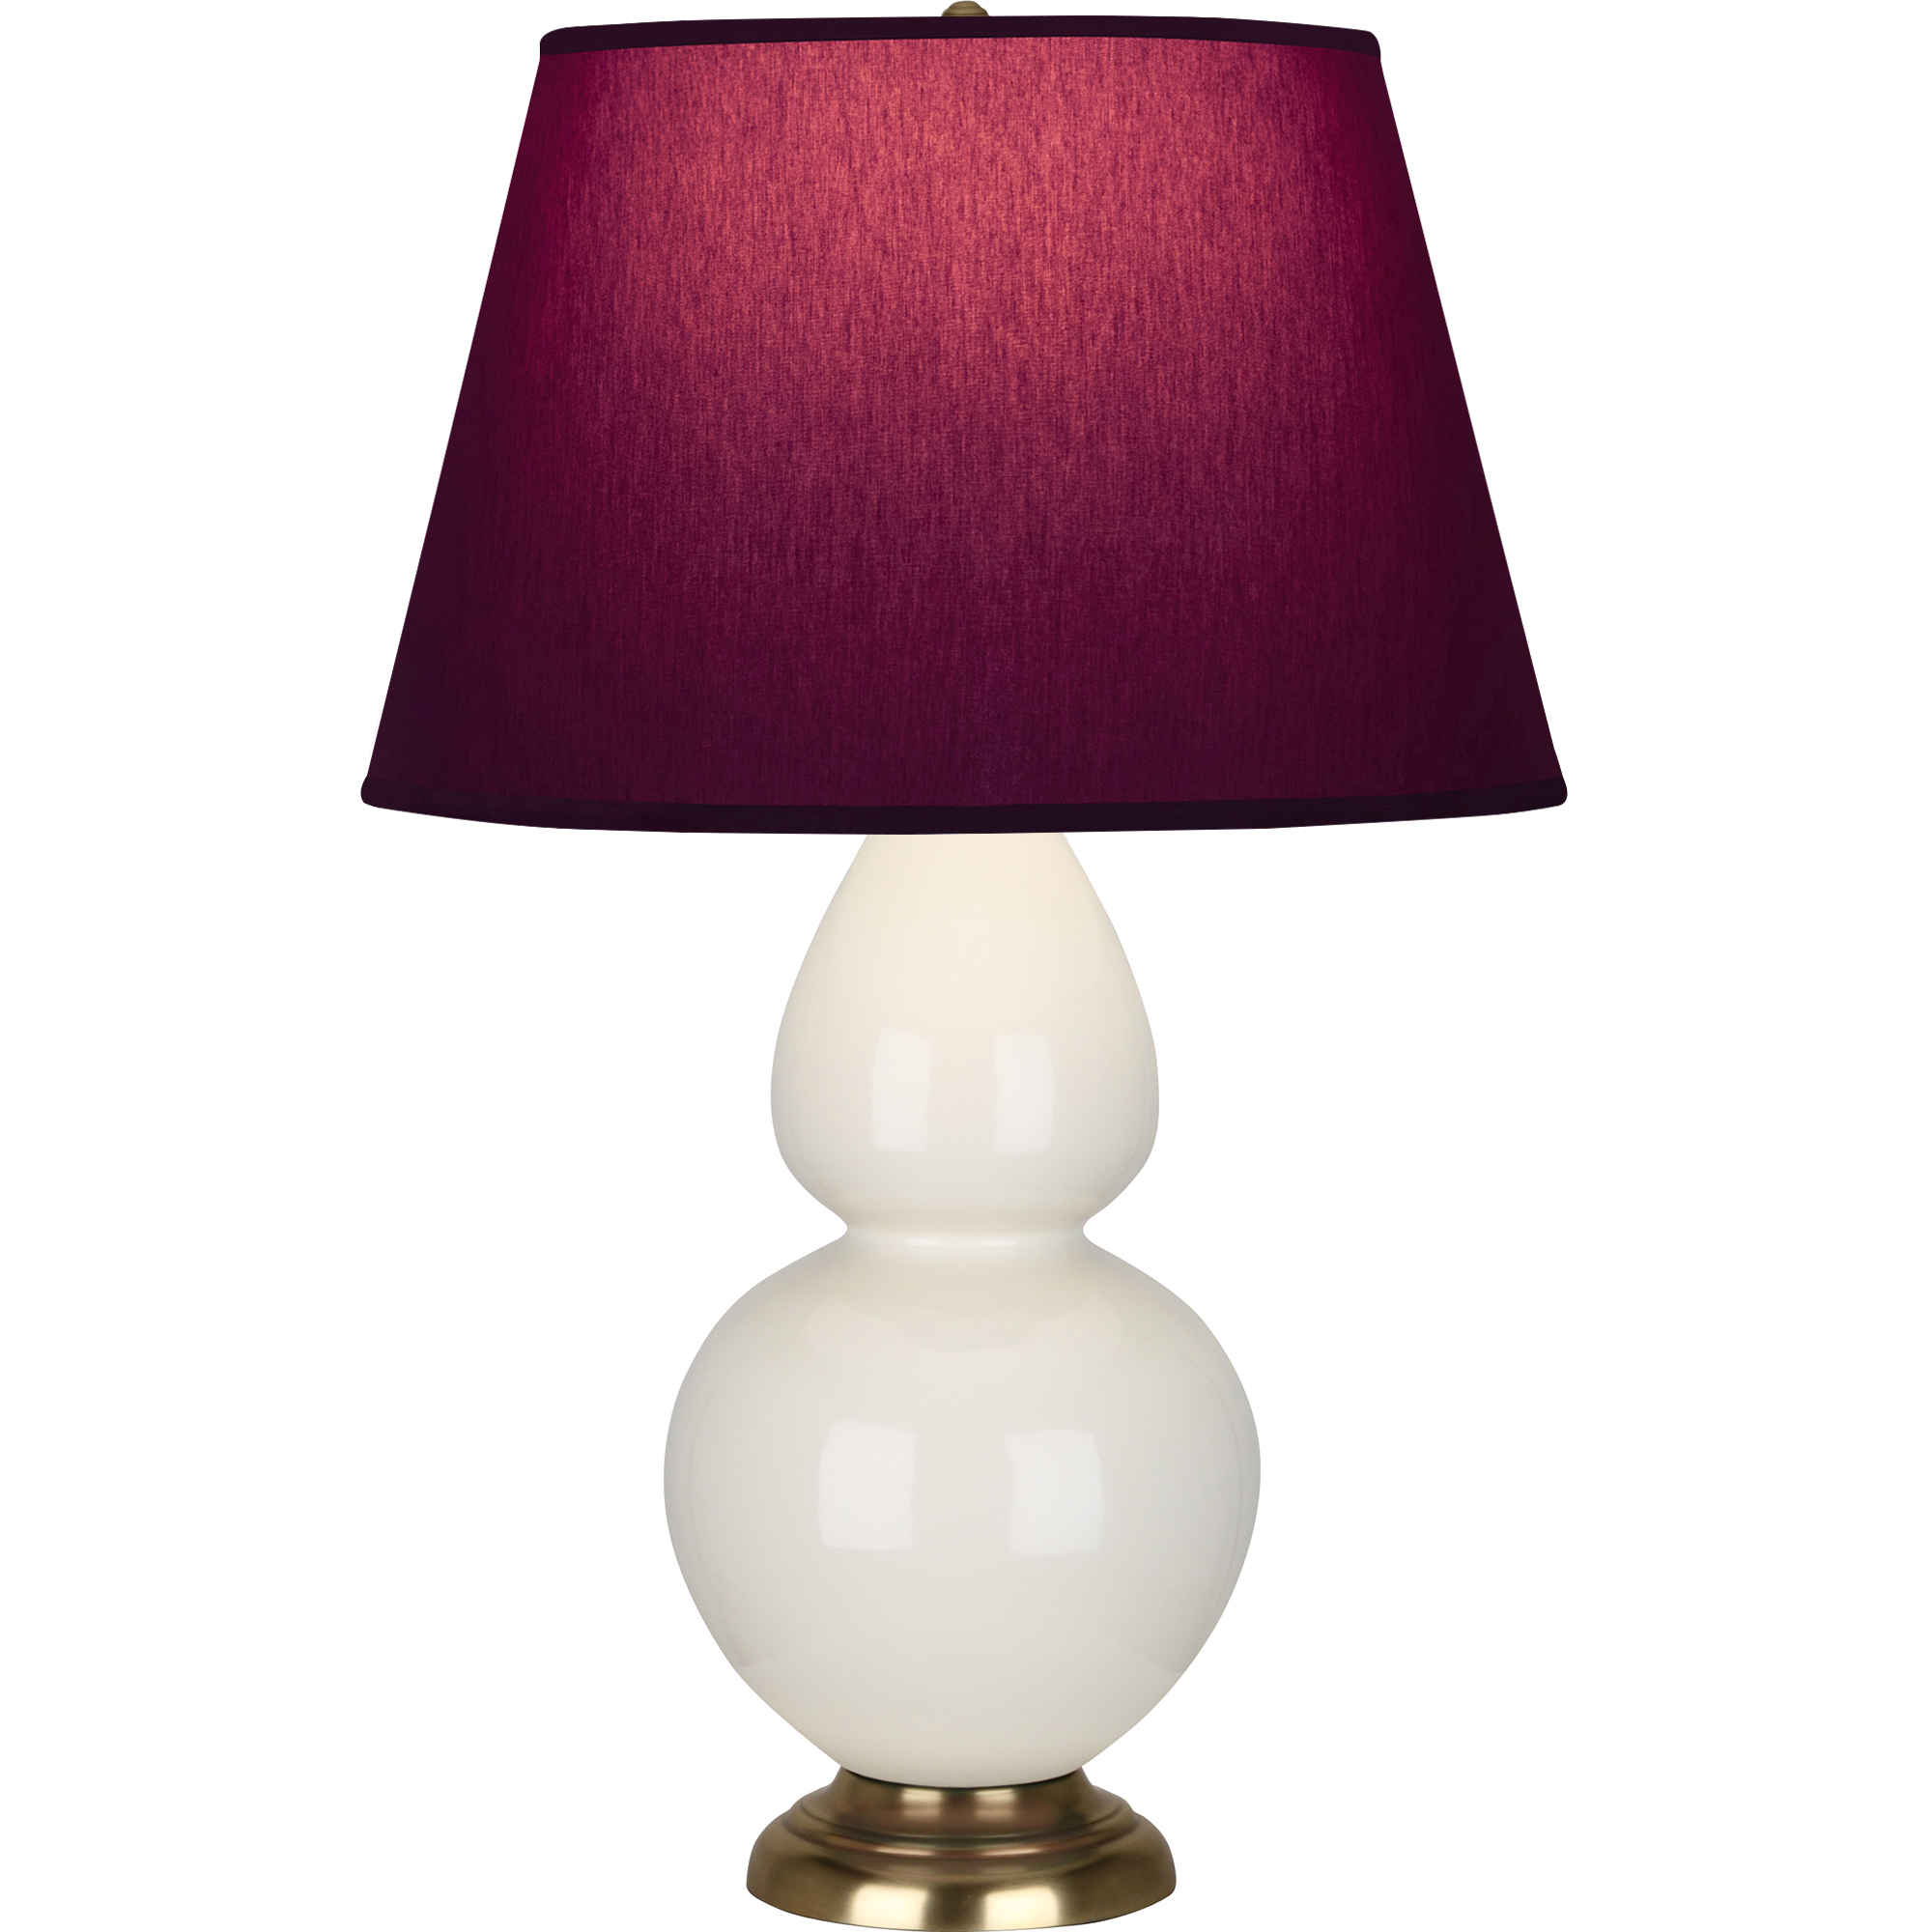 Double Gourd Table Lamp Style #1754P